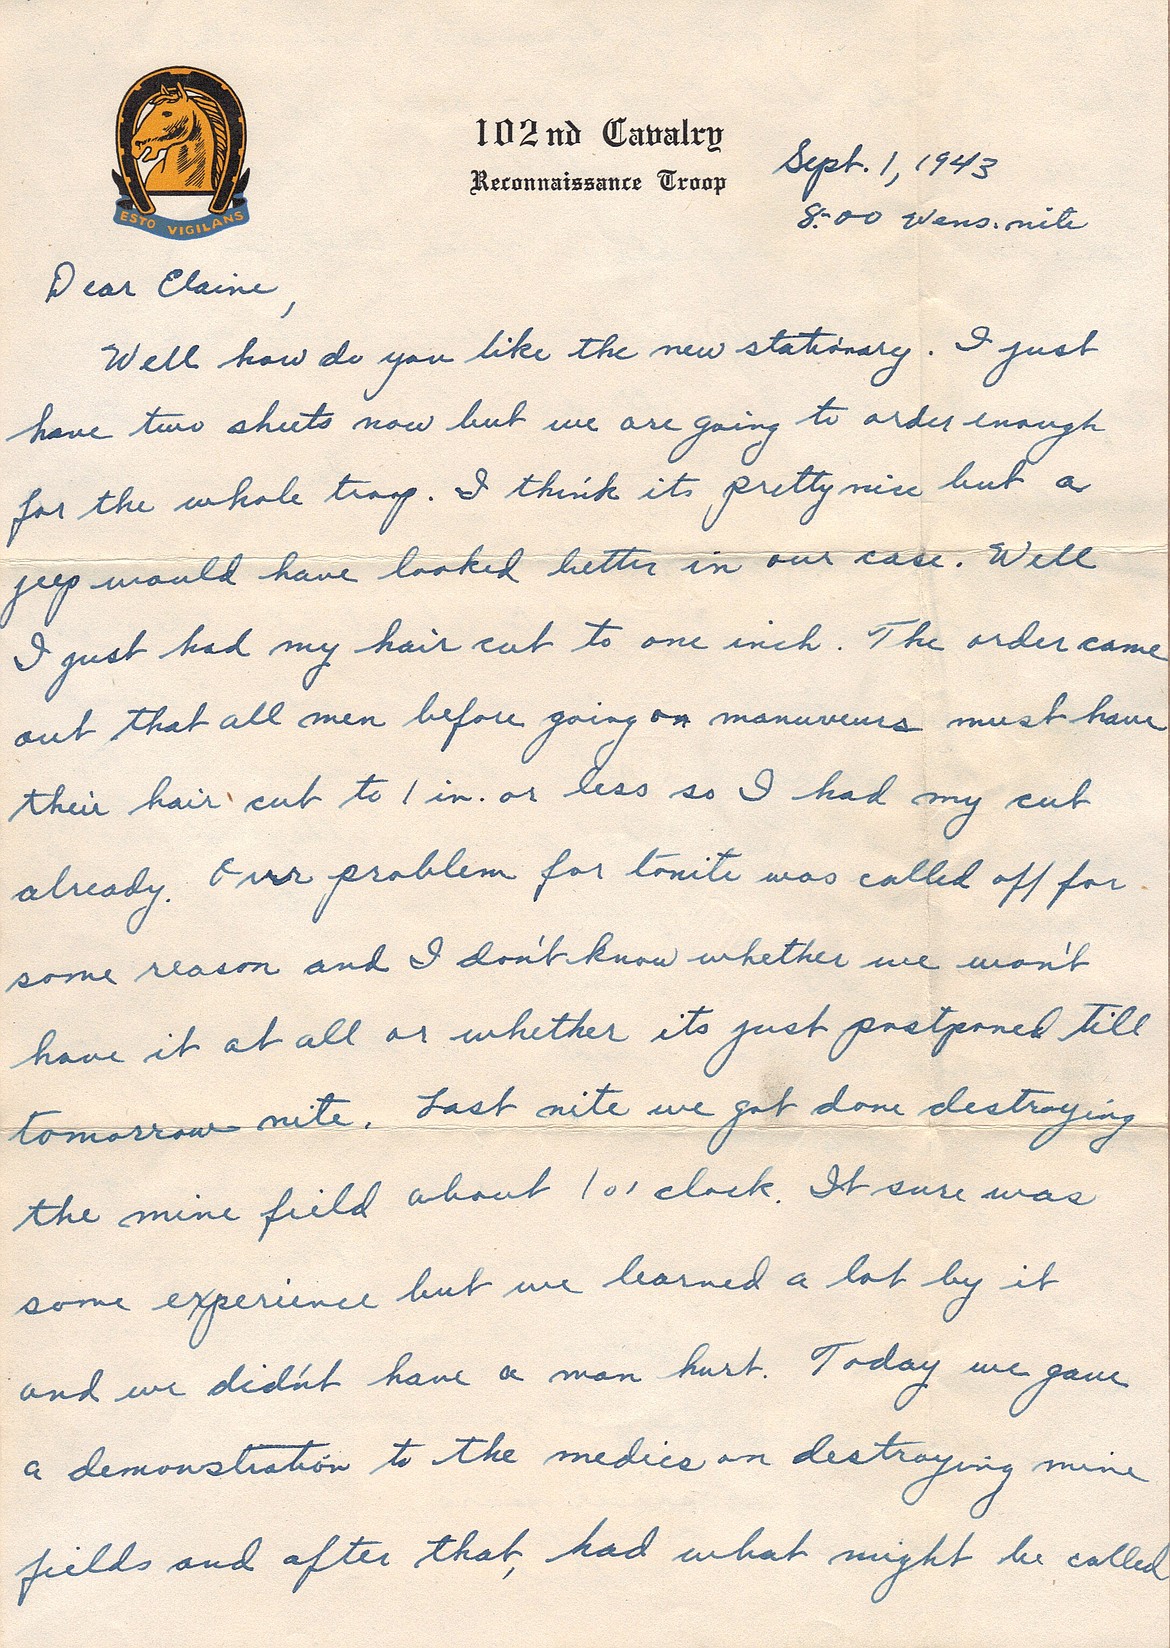 This original letter is one of 1,000 that were discovered in an old trunk by Teresa Irish after her dad died in 2006. This letter, penned by her dad, was written to her mom in 1943. (Photo courtesy of Teresa Irish)